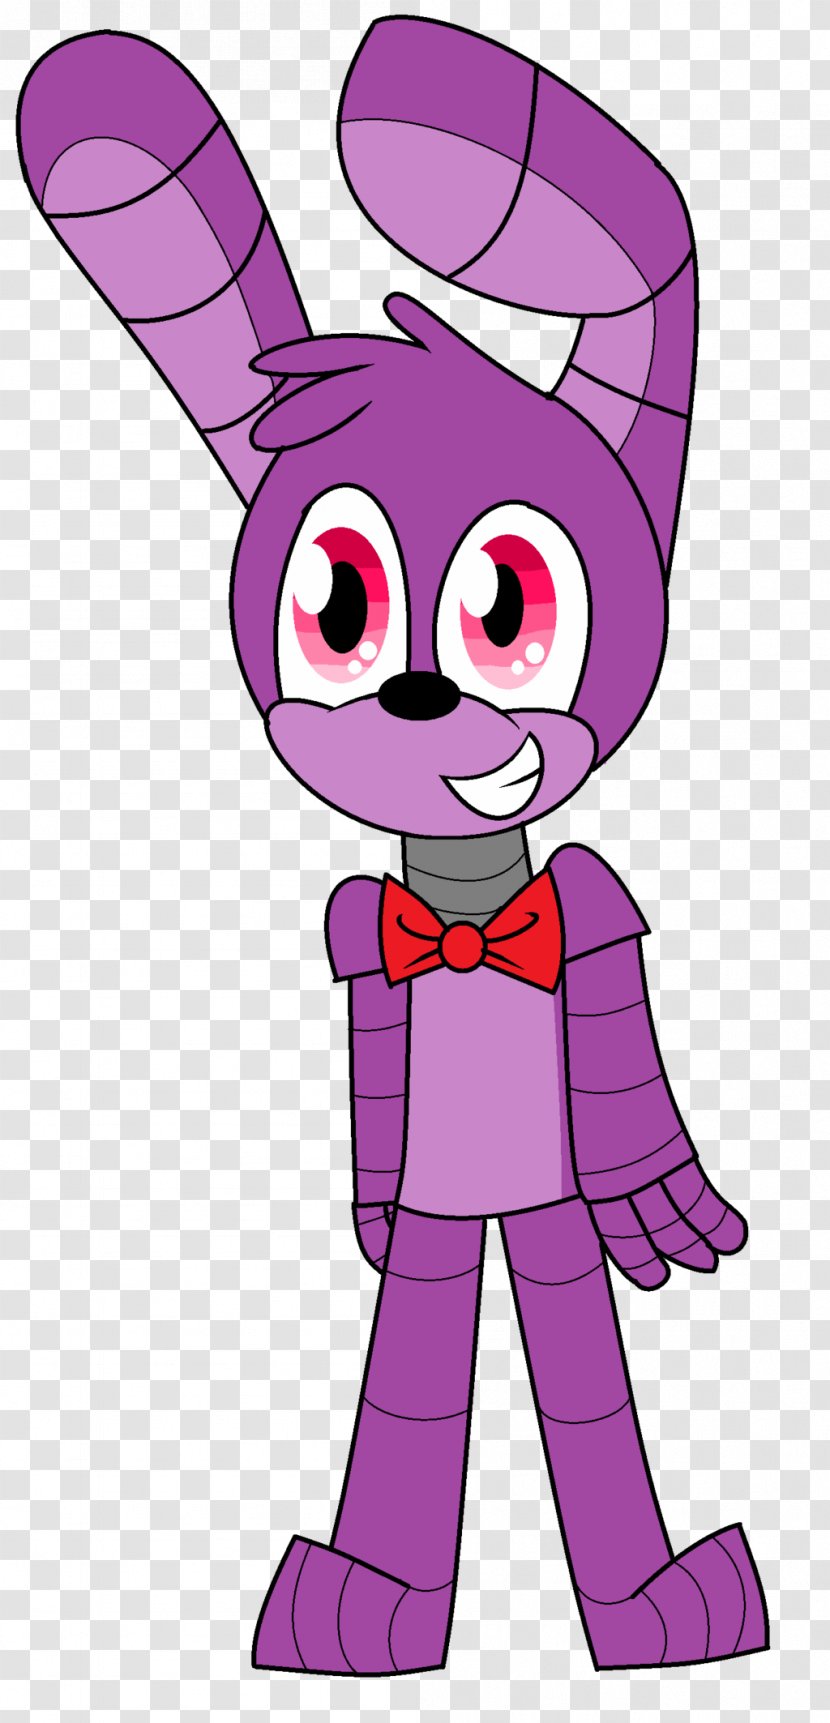 Five Nights At Freddy's: Sister Location Freddy's 2 3 Drawing - Watercolor - Meng Clipart Transparent PNG